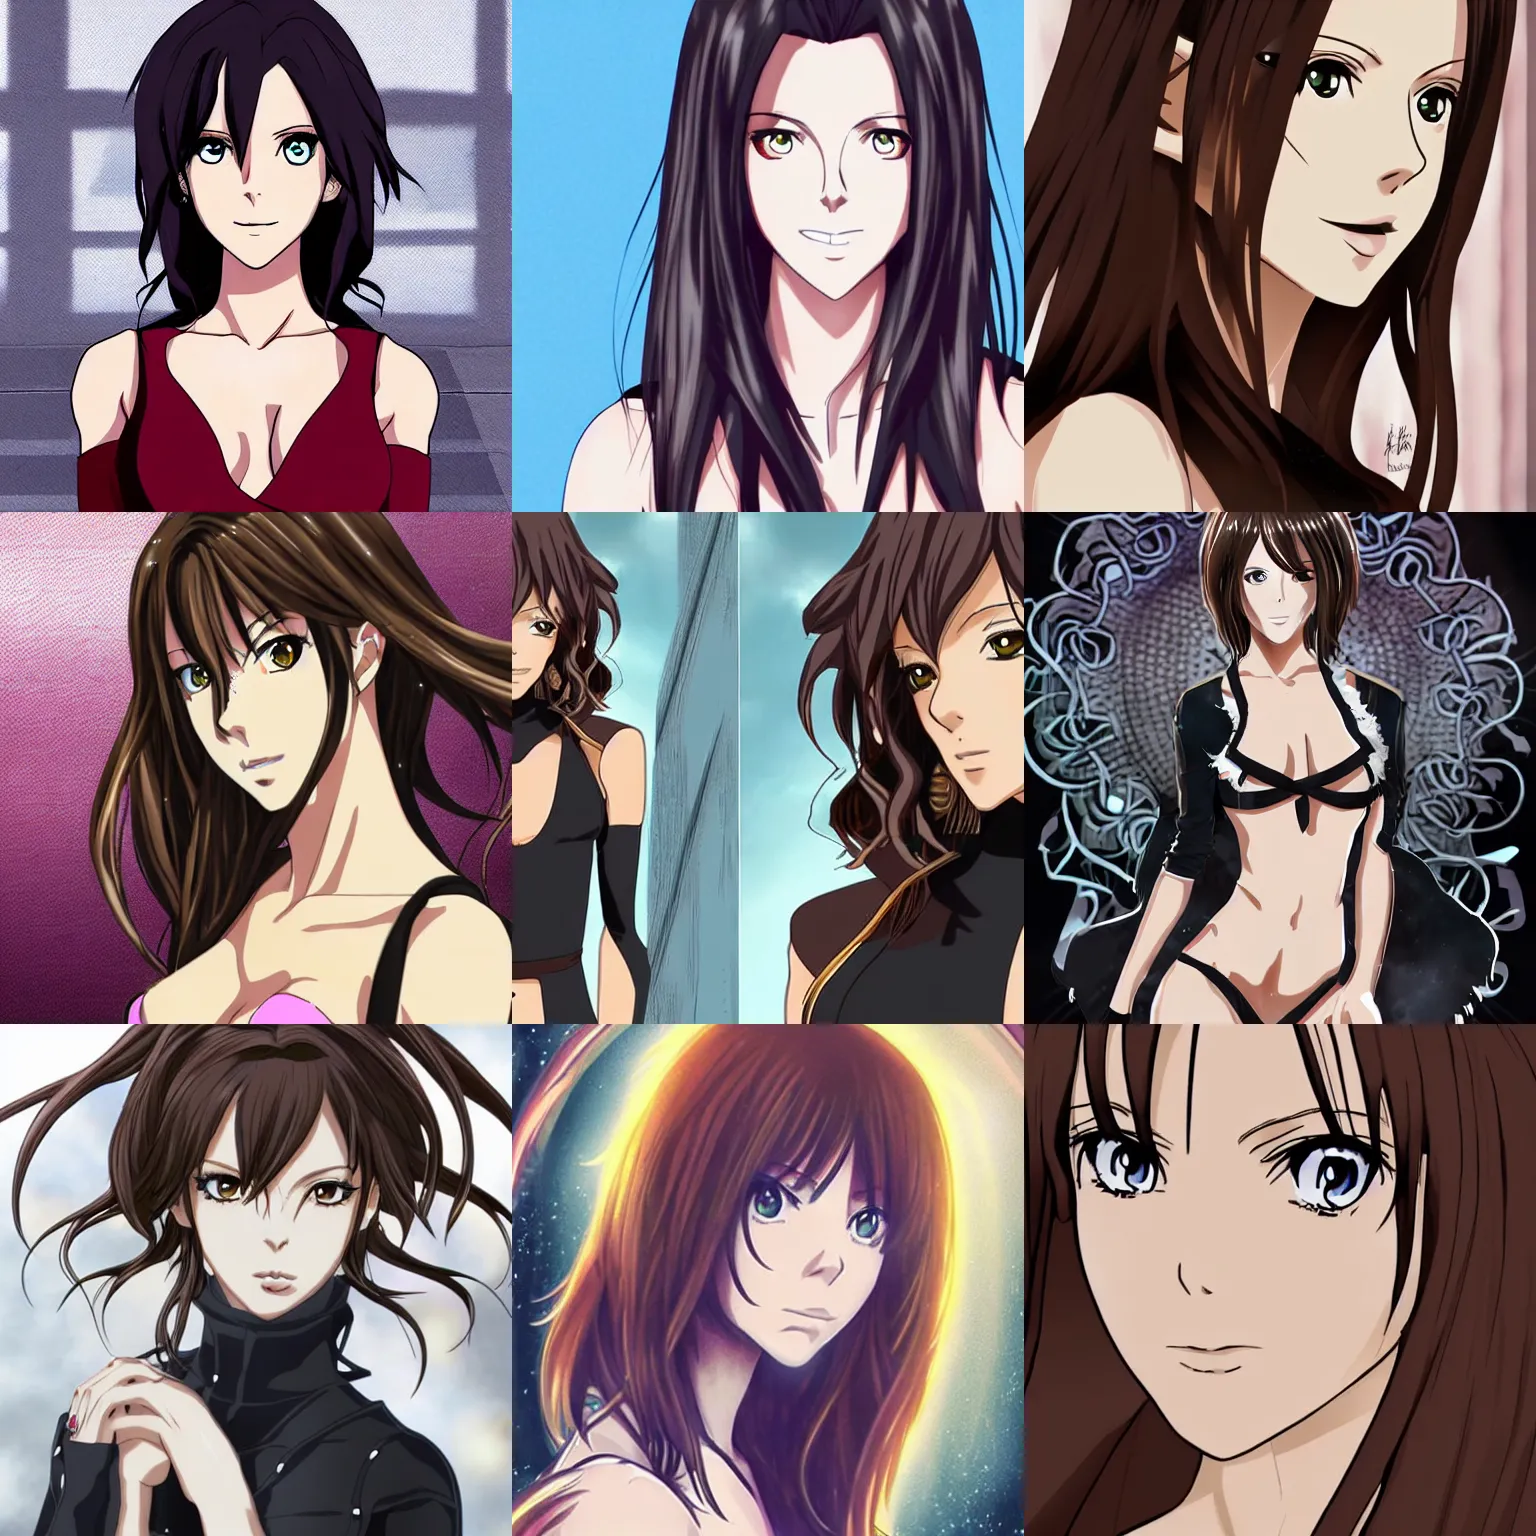 Prompt: an anime-style image of kate beckinsale